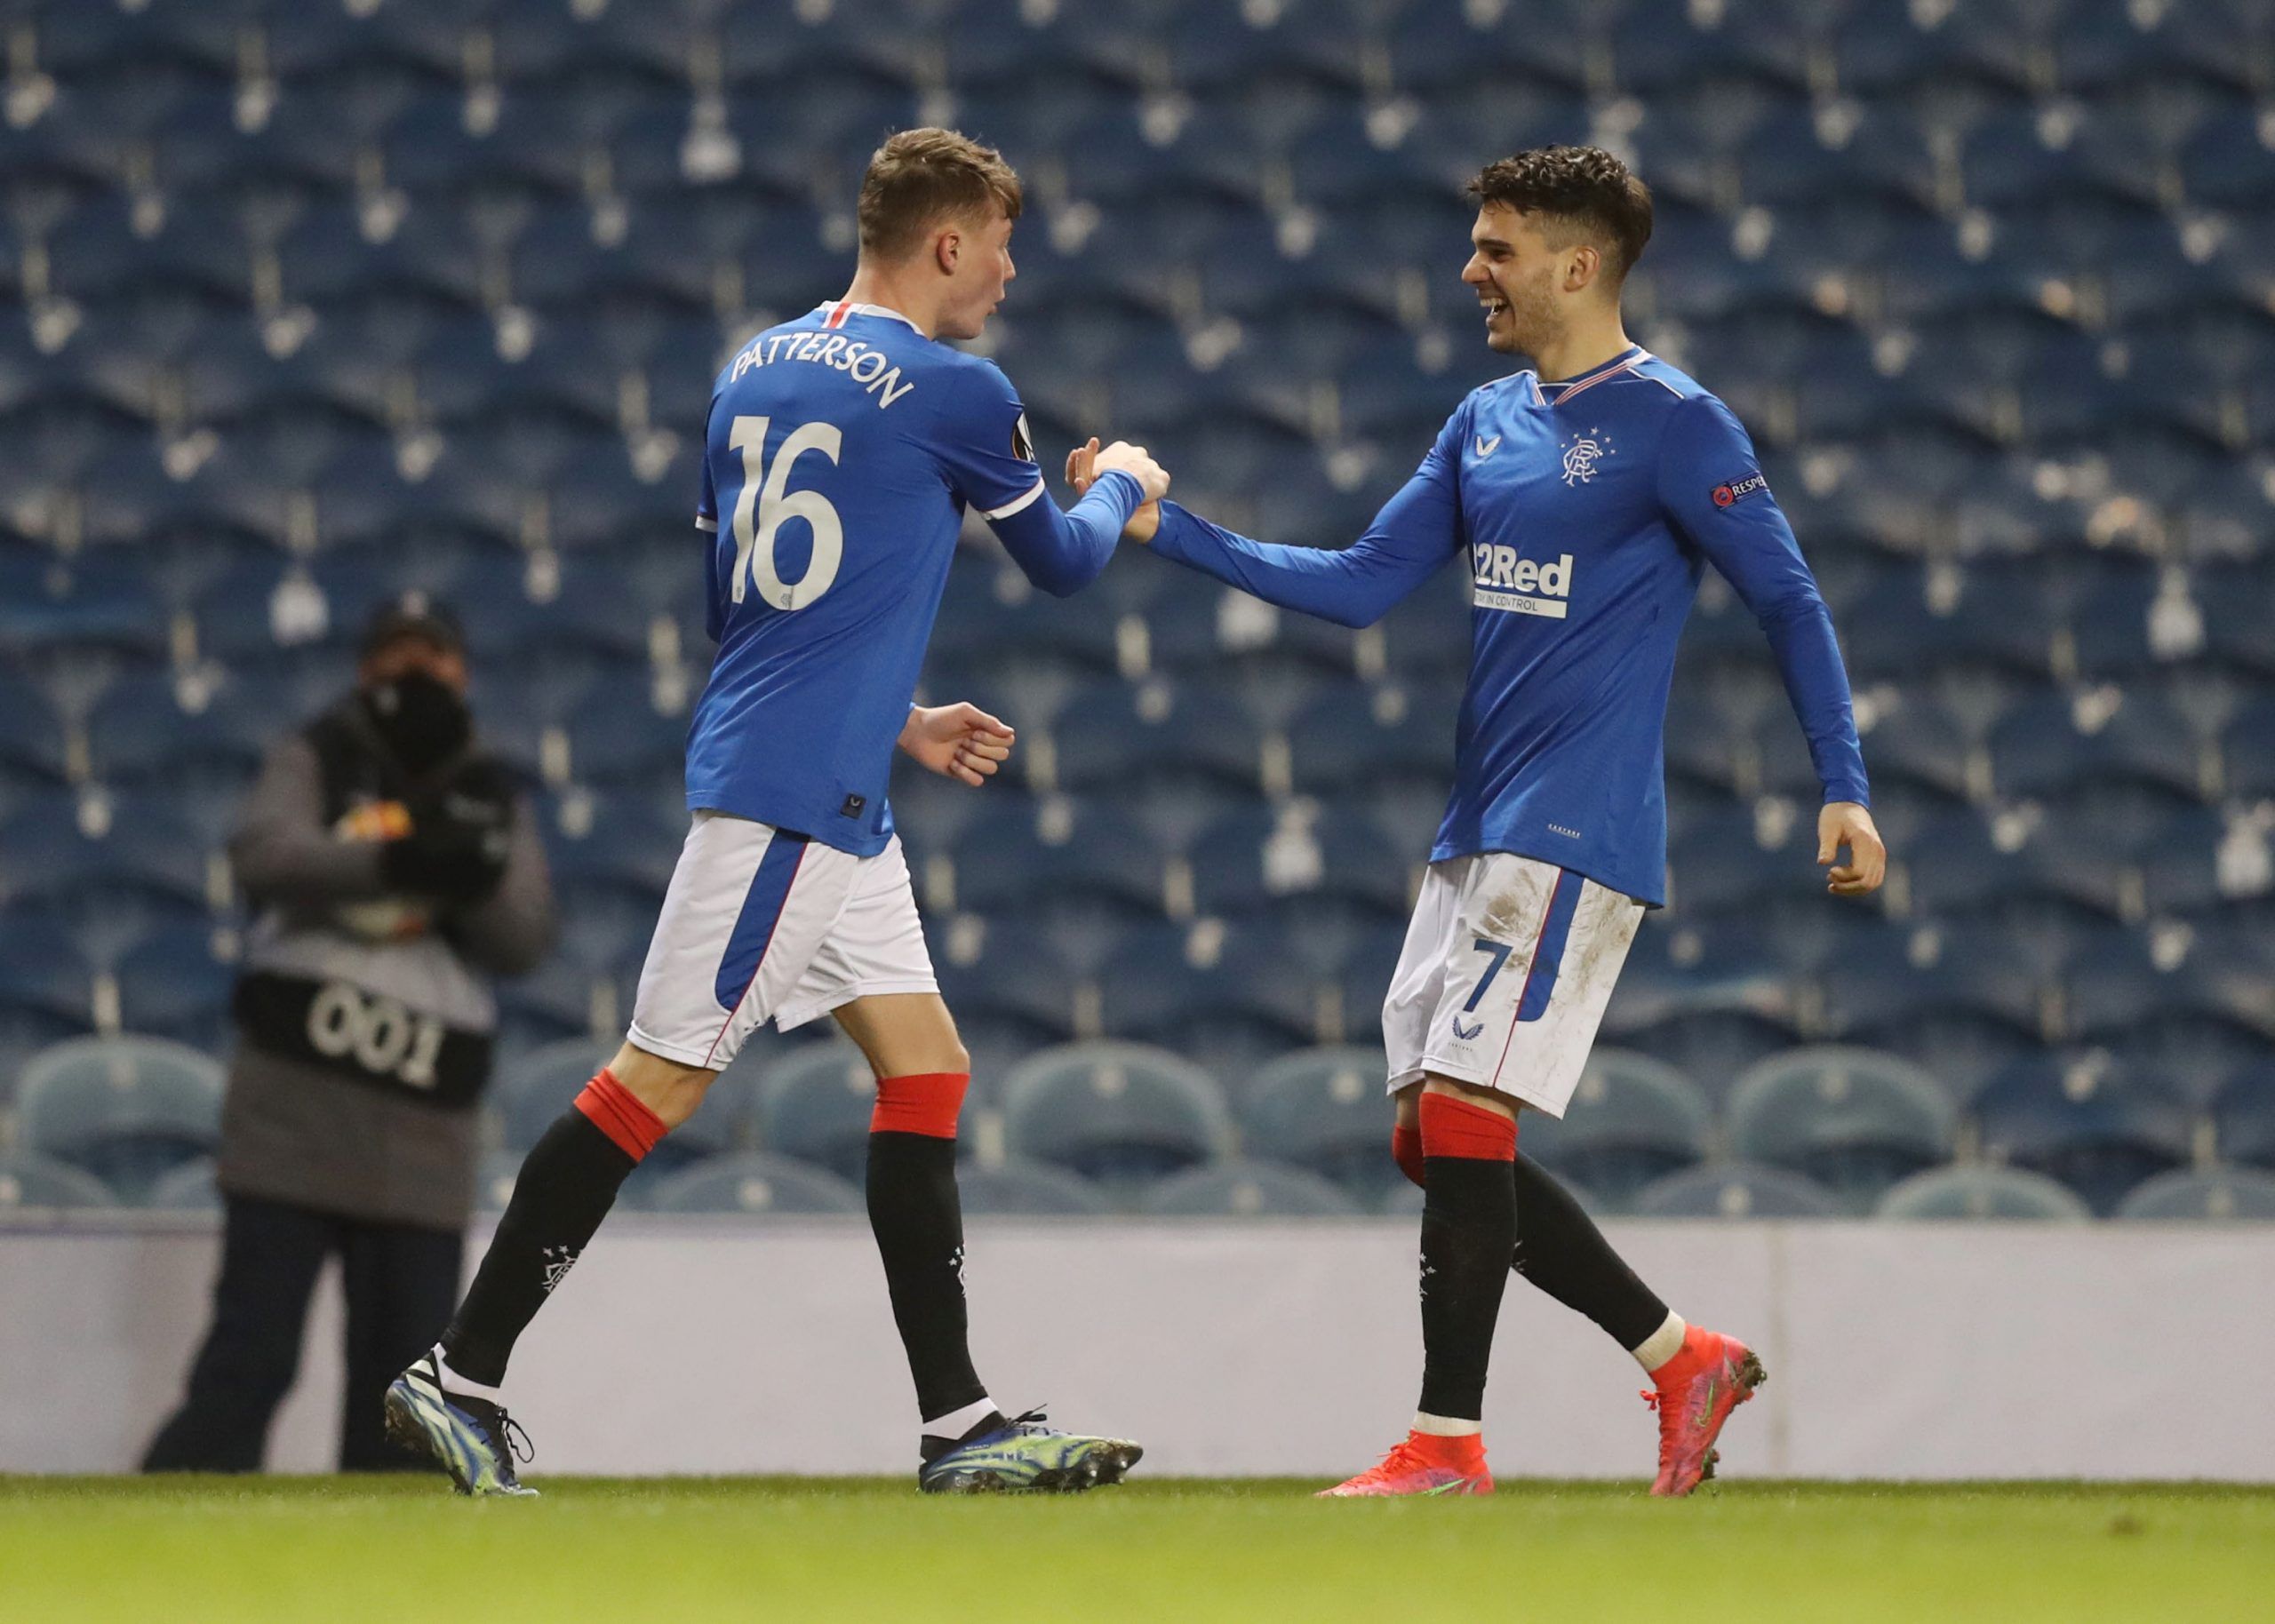 Soccer Football - Europa League - Round of 32 Second Leg - Rangers v Royal Antwerp - Ibrox, Glasgow, Scotland, Britain - February 25, 2021 Rangers' Nathan Patterson celebrates scoring their second goal with Ianis Hagi Pool via REUTERS/Russell Cheyne